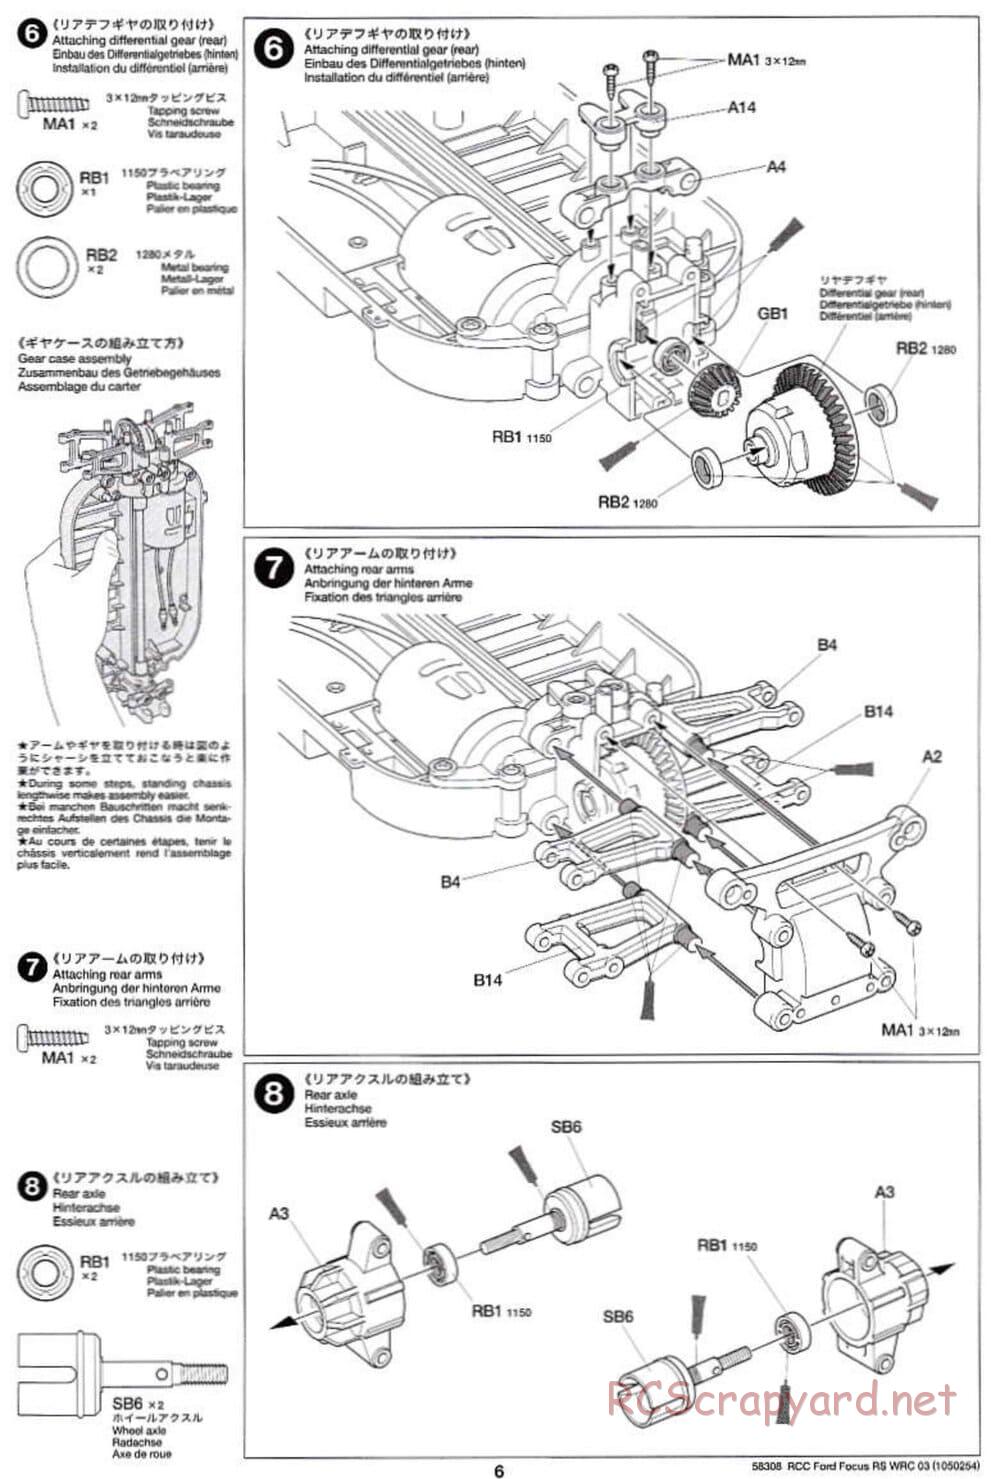 Tamiya - Ford Focus RS WRC 03 - TT-01 Chassis - Manual - Page 6